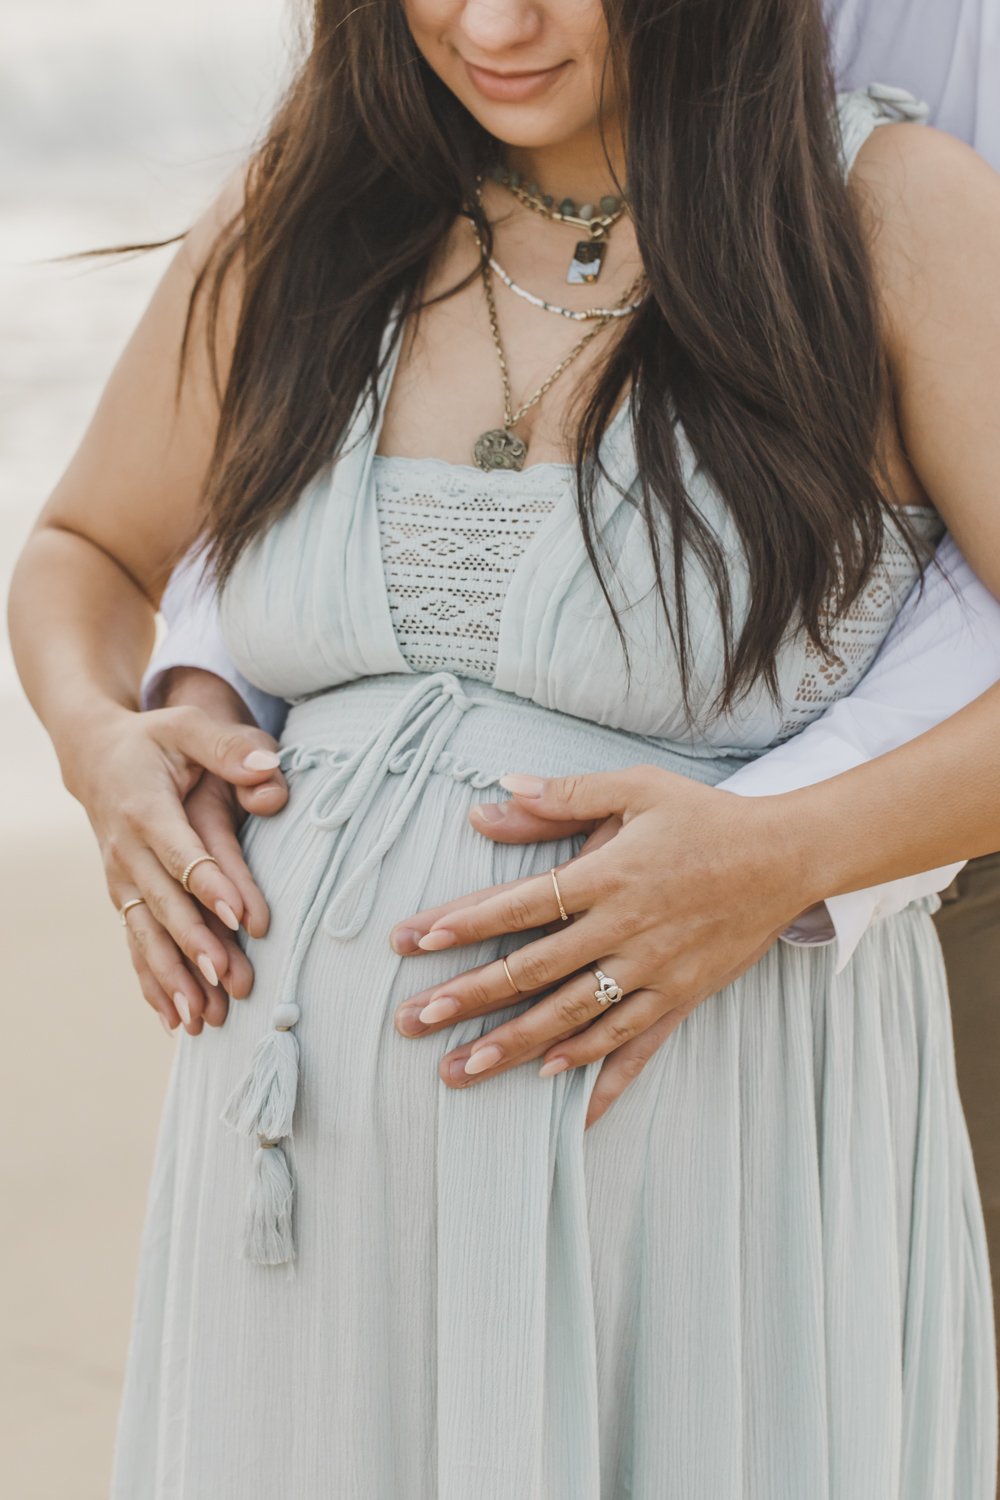 PERRUCCIPHOTO_OCONNELL_MATERNITY_85.jpg